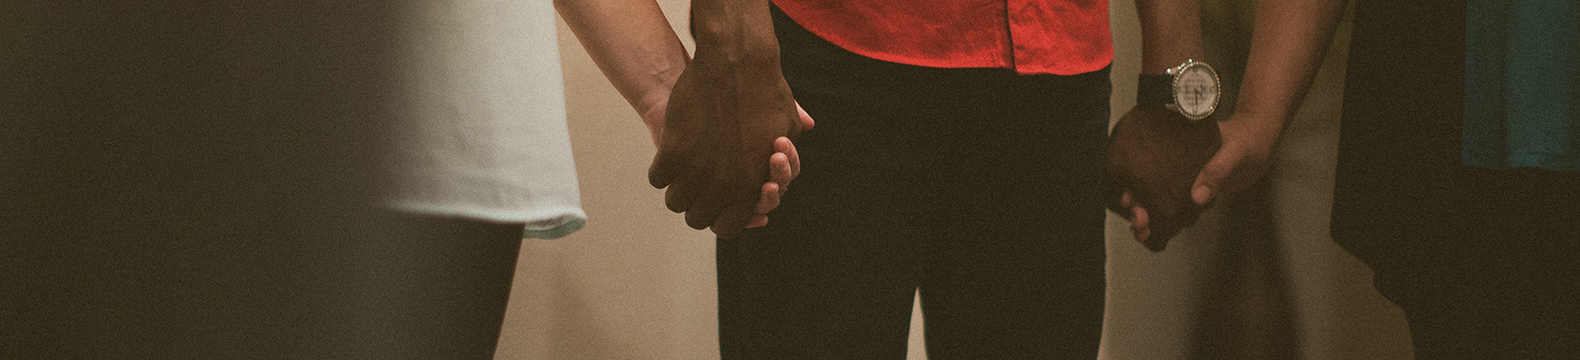 A Conversation on Racial Reconciliation & Grieving Together